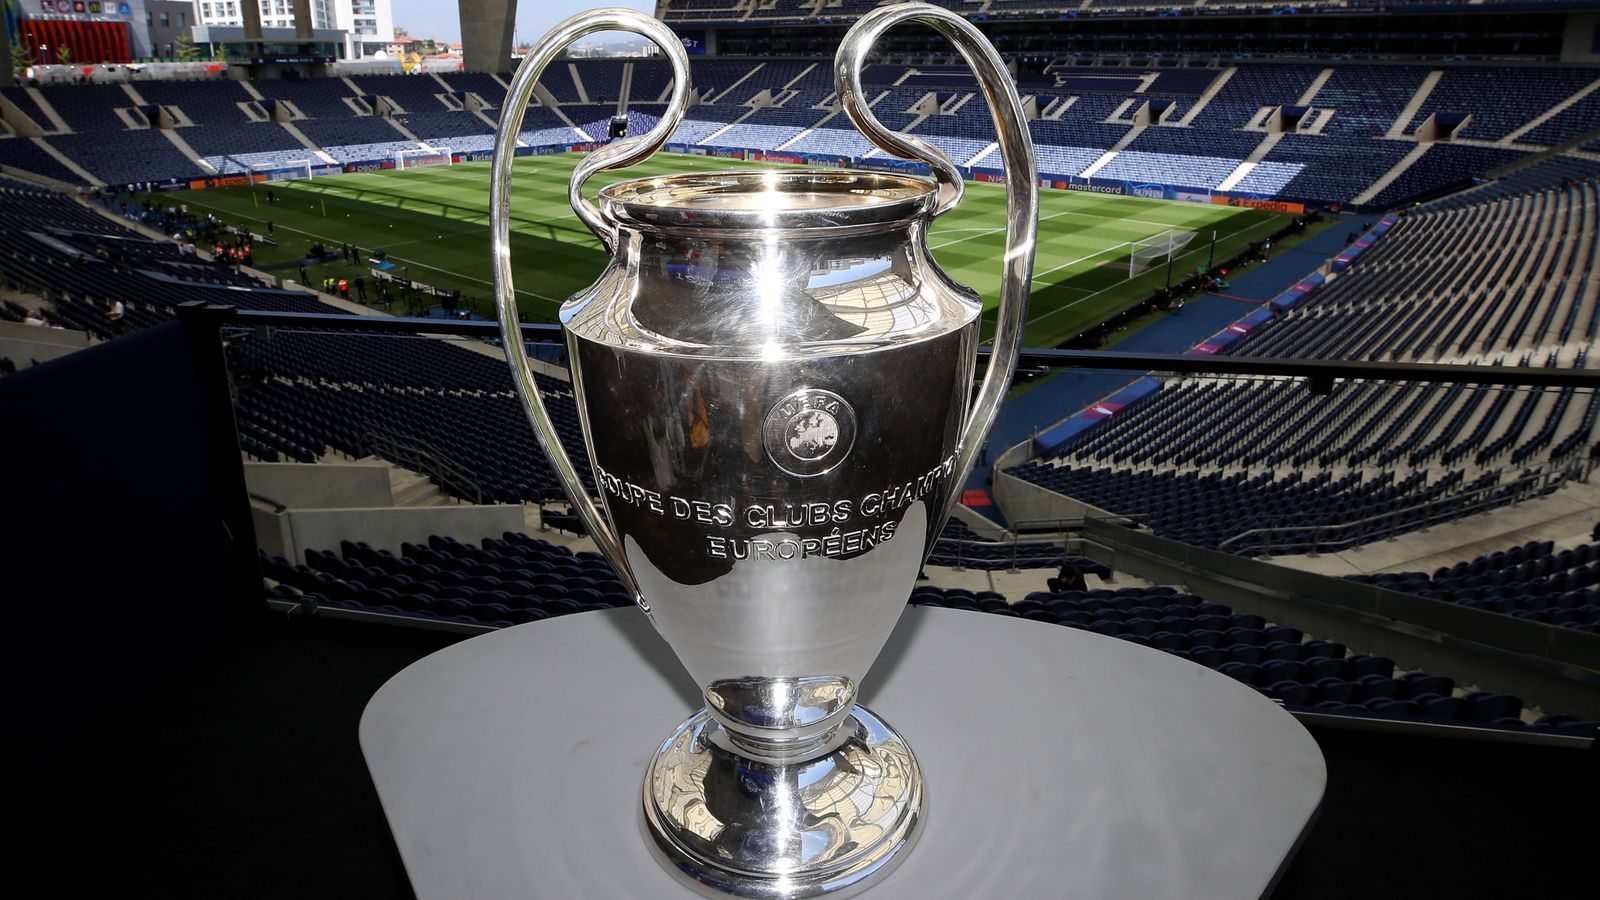 The UEFA Champions League trophy on display in the ground during a training session ahead of the UEFA Champions League final, at the Estadio do Dragao, Portugal. Picture date: Friday May 28, 2021.